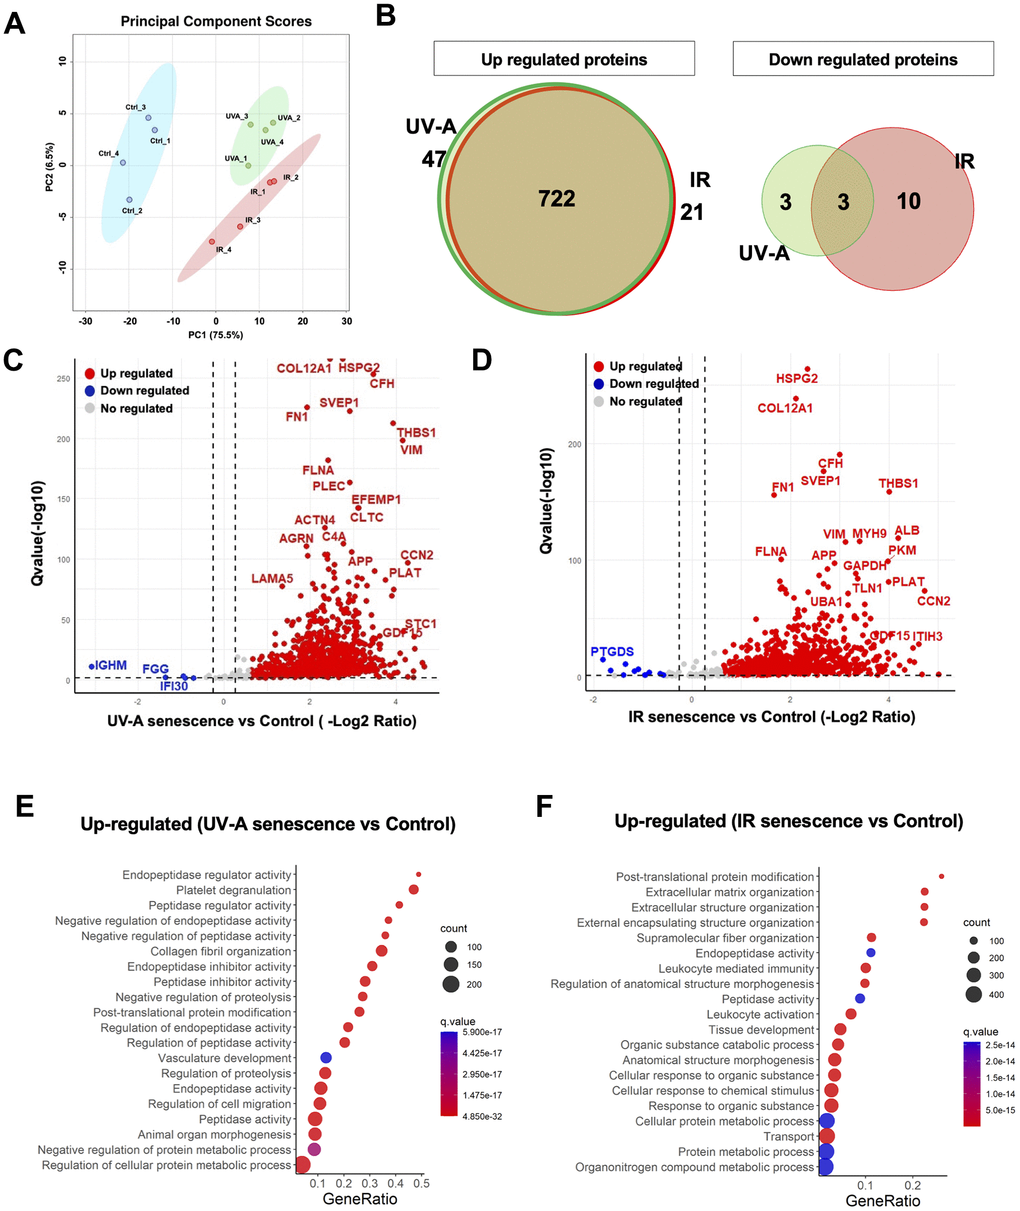 Unbiased quantitative proteome profile of the SASP from human corneal endothelial cells. (A) Conditioned media (CM) from UV-A-induced human senescent corneal endothelial cells (hCEnCs) (n = 4), IR-induced senescent hCEnCs (n = 4) and non-senescent hCEnCs (control) (n = 4) were fractionated using HPLC and analyzed using mass spectrometry. We show the principal component score analysis of CM from senescent and non-senescent hCEnCs. (B) Venn diagram showing unique and significantly up-regulated (left) and down-regulated (right) SASP proteins (≥ 2 unique peptides, fold change ≥ 1.5, q-value ≤ 0.05) in UV-A- and IR-induced senescent hCEnCs. (C, D) Volcano plot showing Q-values (−log10) vs. fold change of (log2) UV-A-induced senescent and control hCEnCs (C) as well as IR-induced senescent and control hCEnCs (D). Blue, downregulated proteins; red, upregulated proteins; and gray, no significant change (≥ 2 unique peptides, fold change ≥ 1.5, q-value ≤ 0.05). (E) Pathway and network analysis of secreted proteins that are significantly increased in the SASP from UV-A-induced senescent hCEnCs. (F) Pathway and network analysis of secreted proteins that are significantly increased in the SASP from IR-induced senescent hCEnCs.